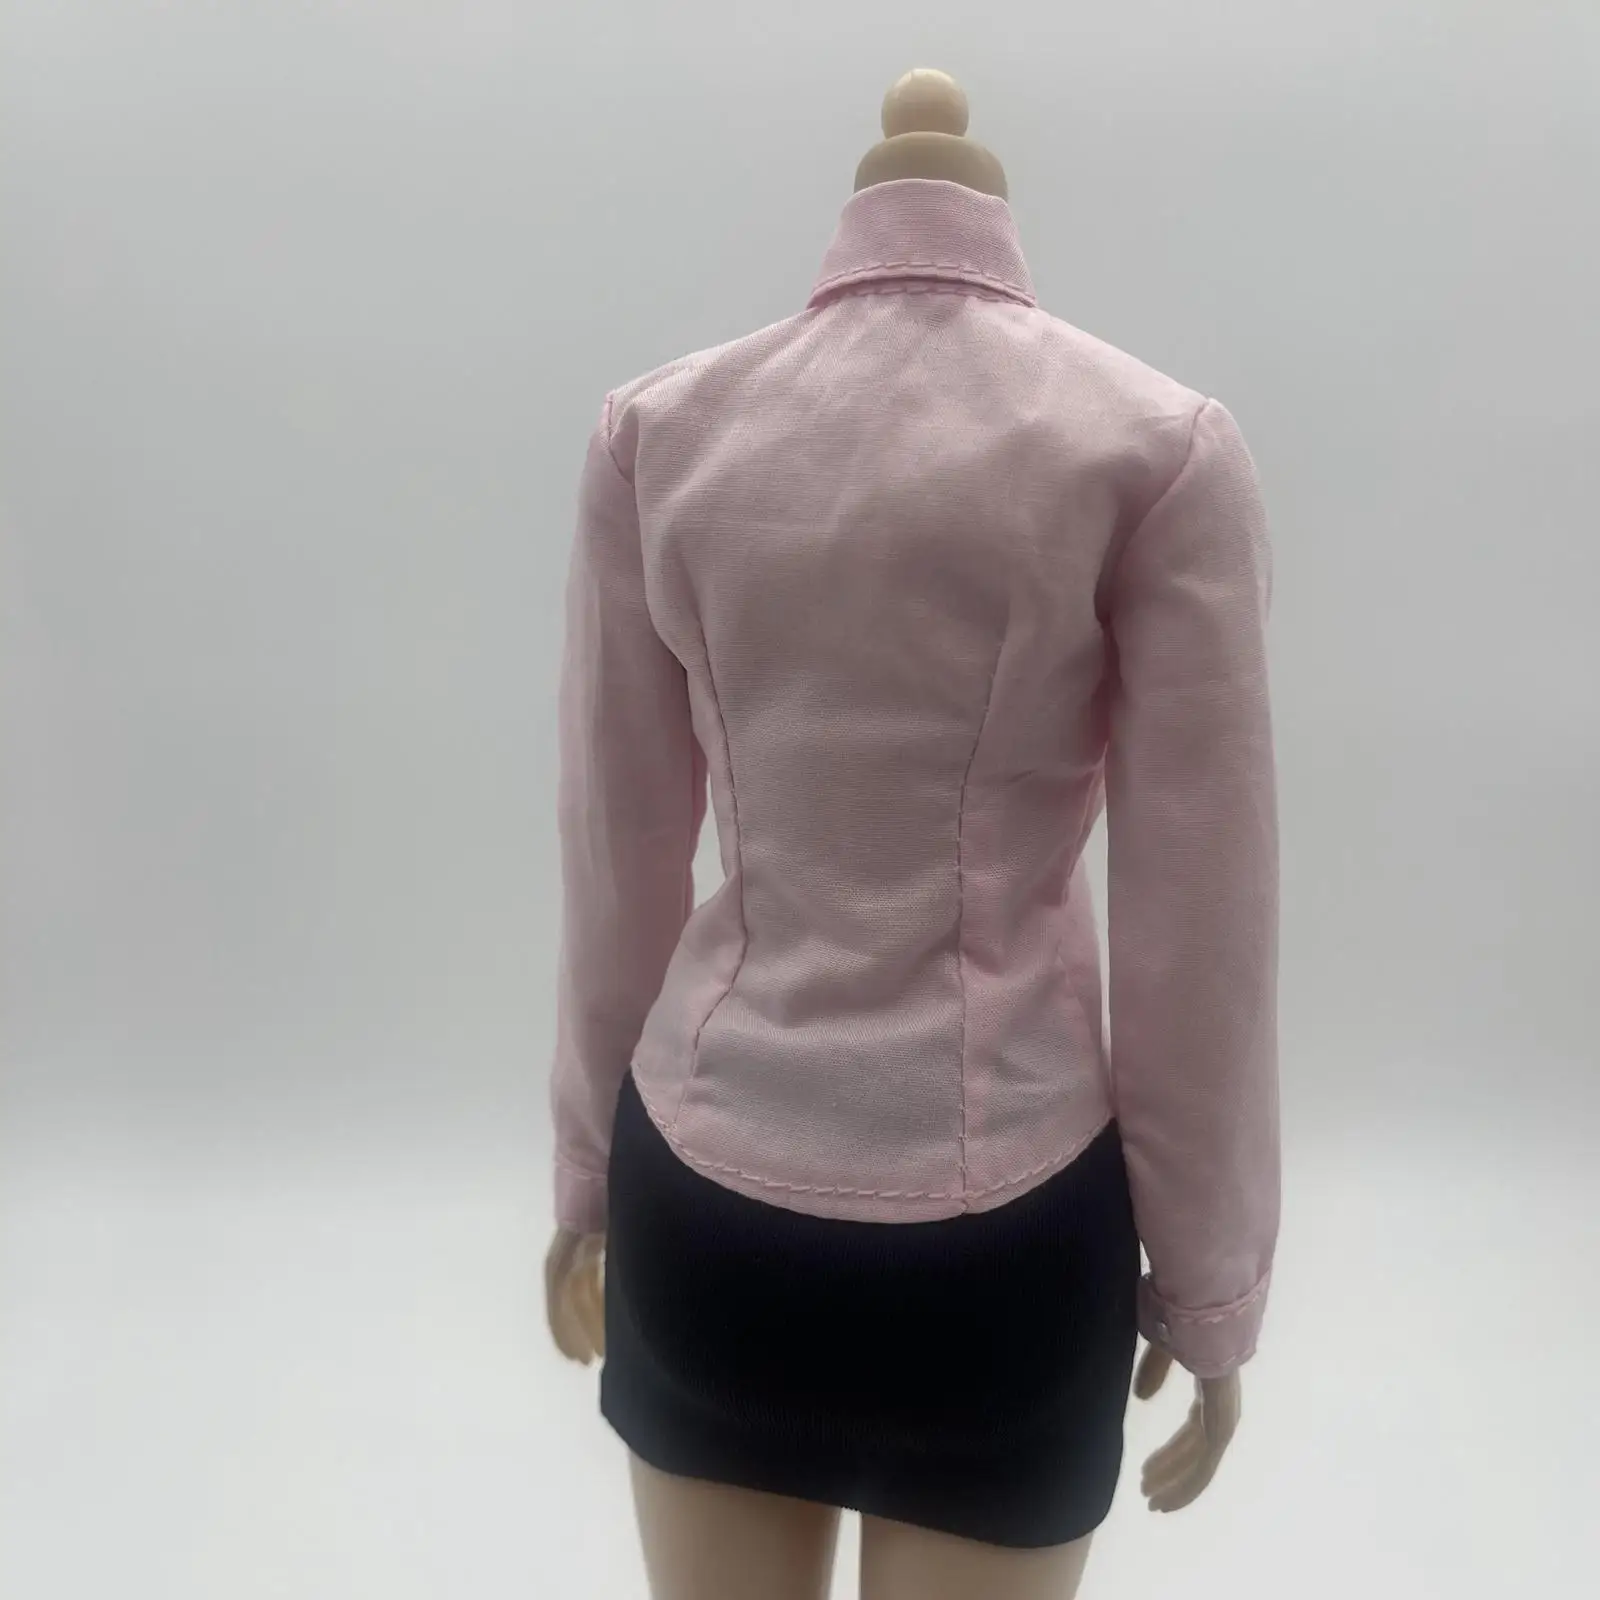 1/6 Girl Pink Long Sleeve Shirts for 12inch Action Figure Accessory Dress up